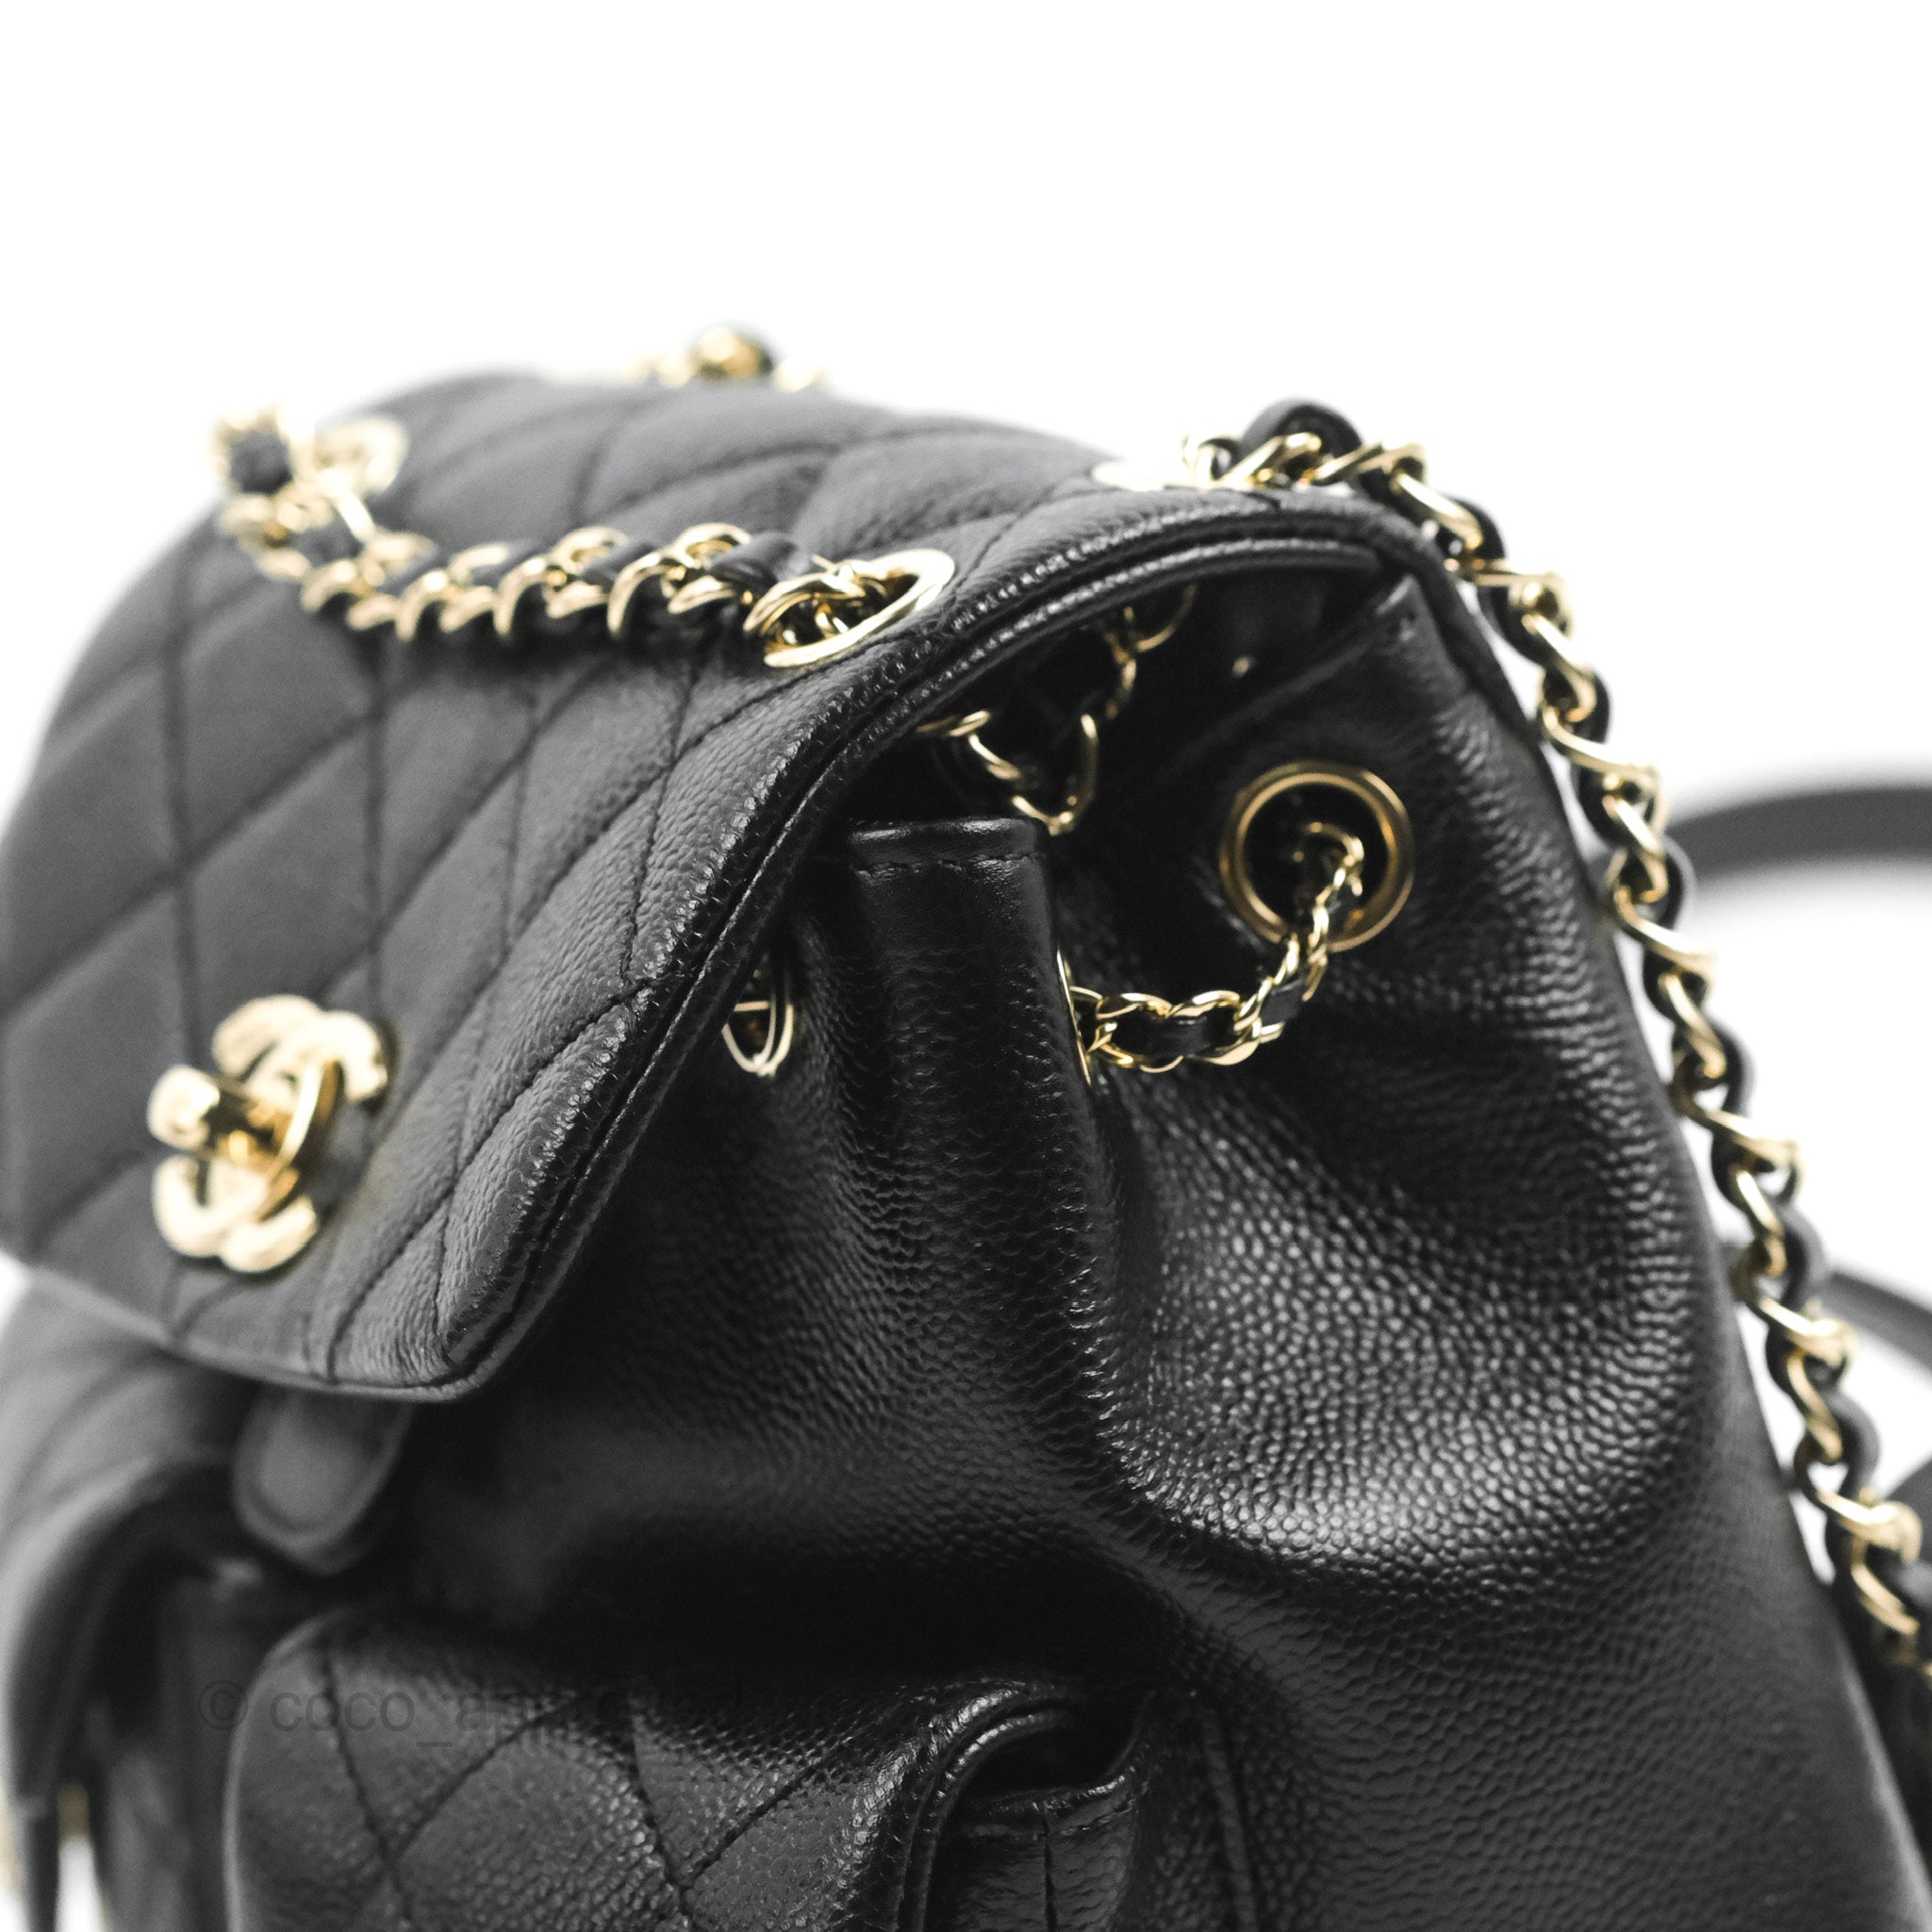 chanel patent backpack